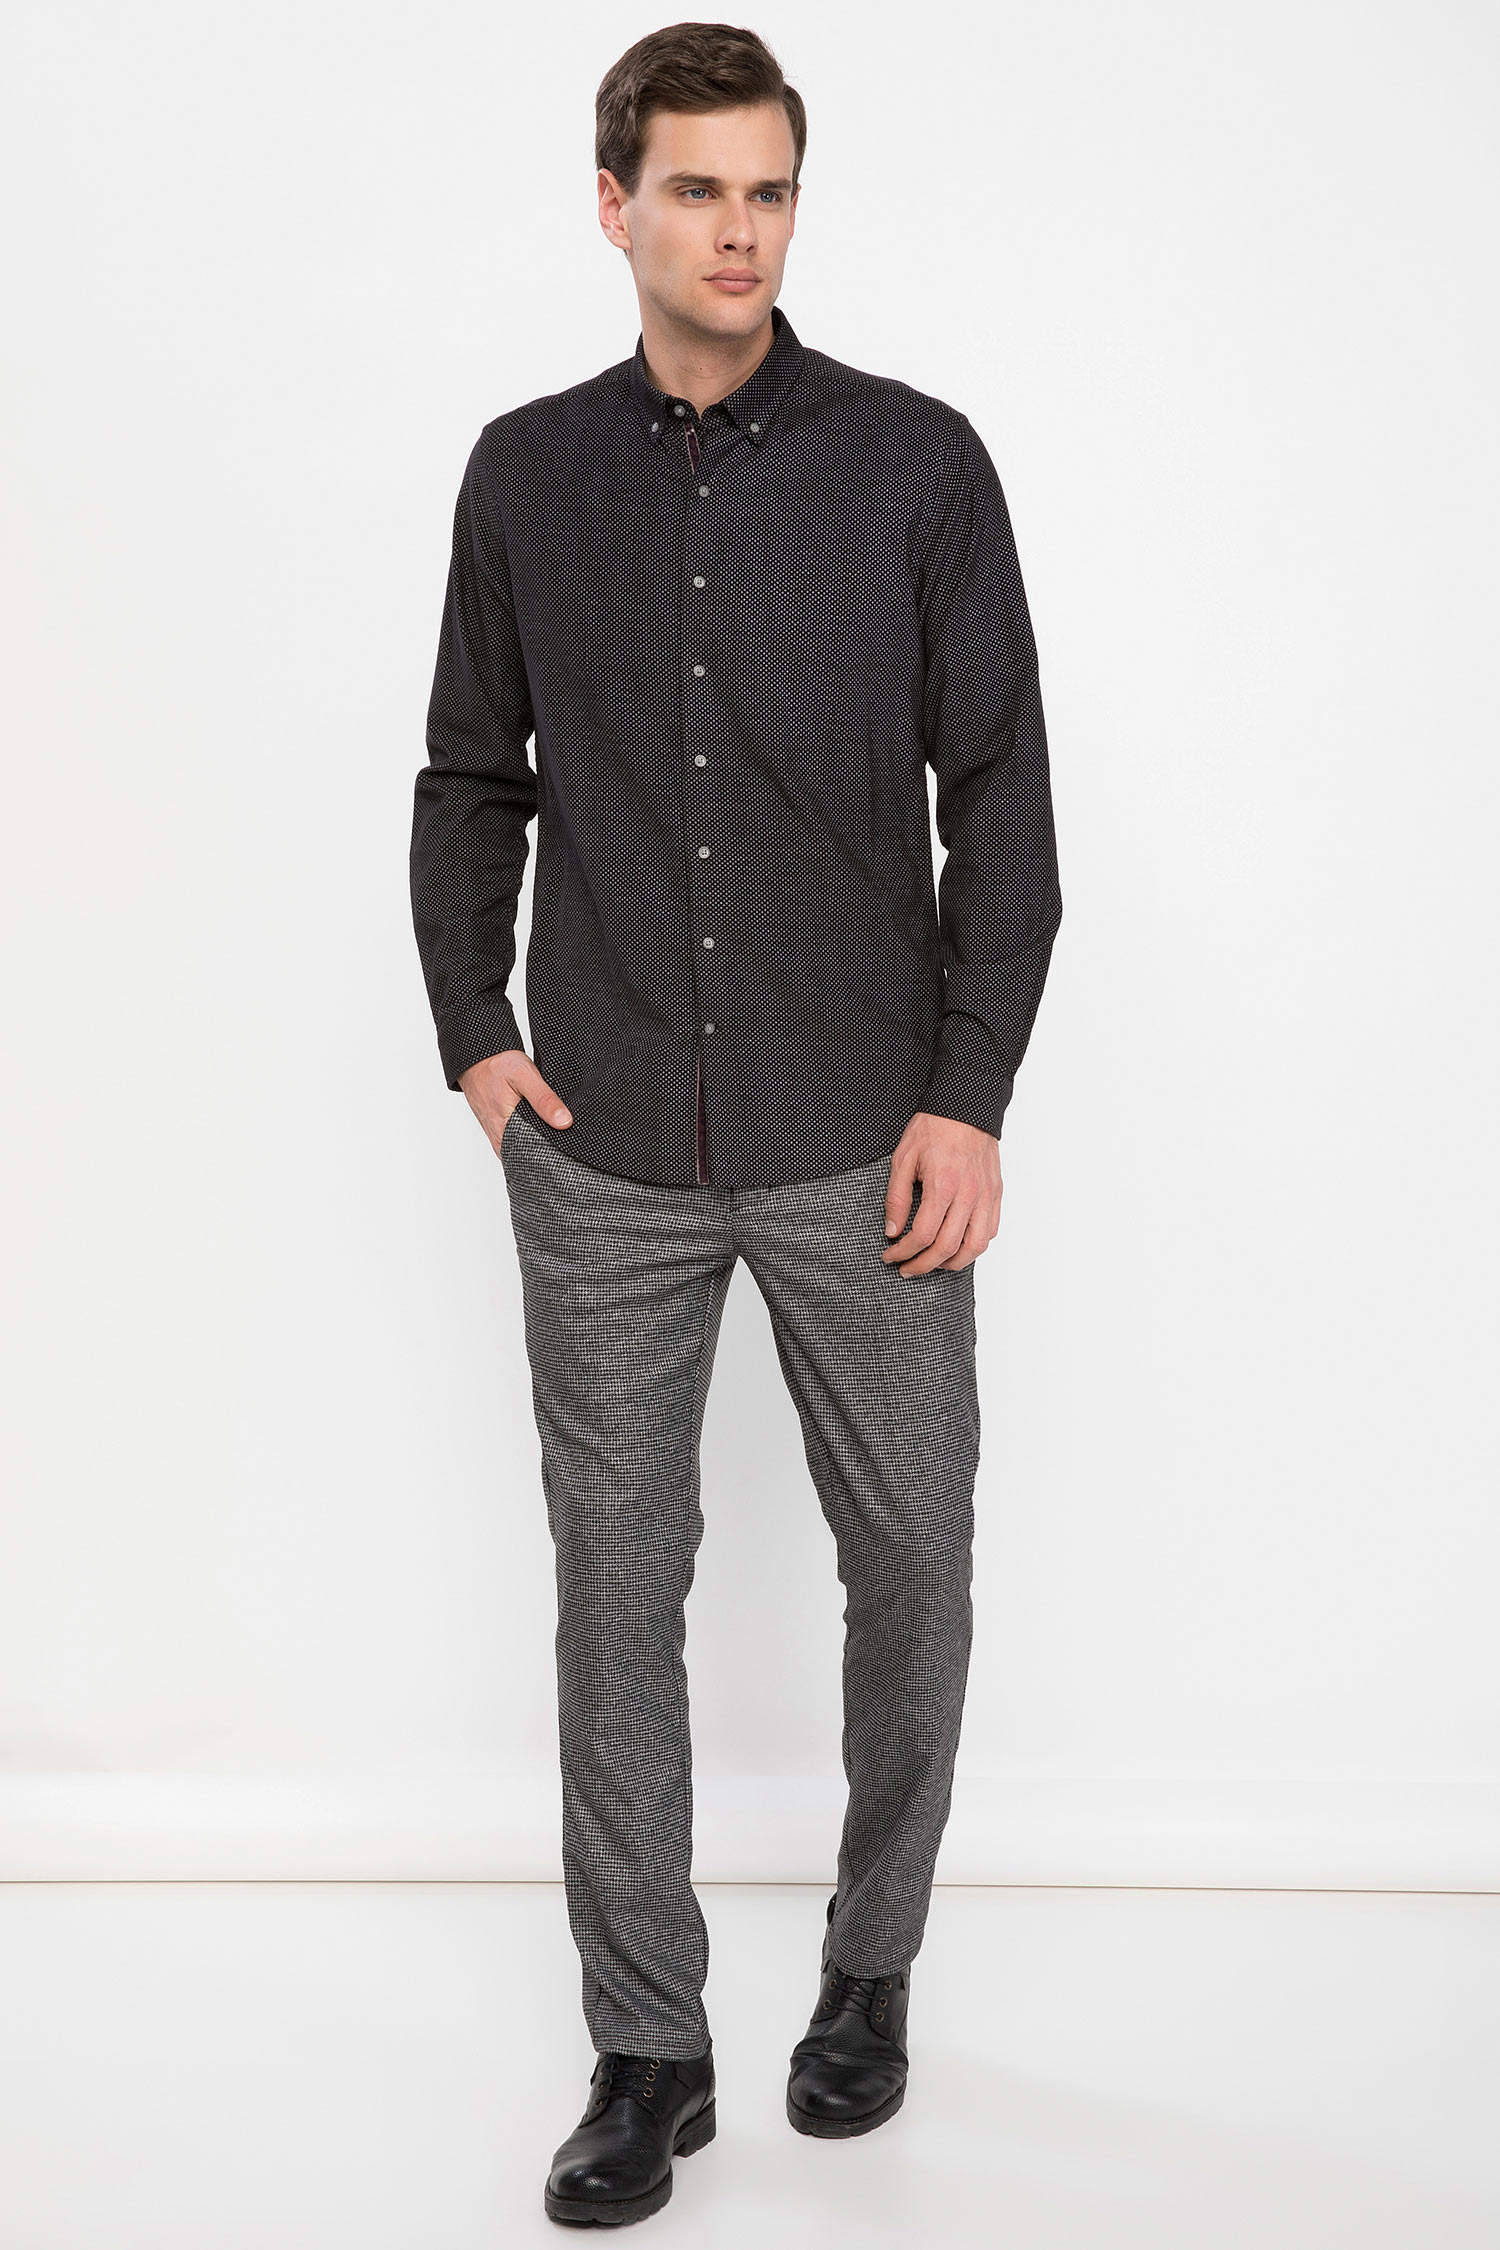 Defacto Man Woven Trousers. 3